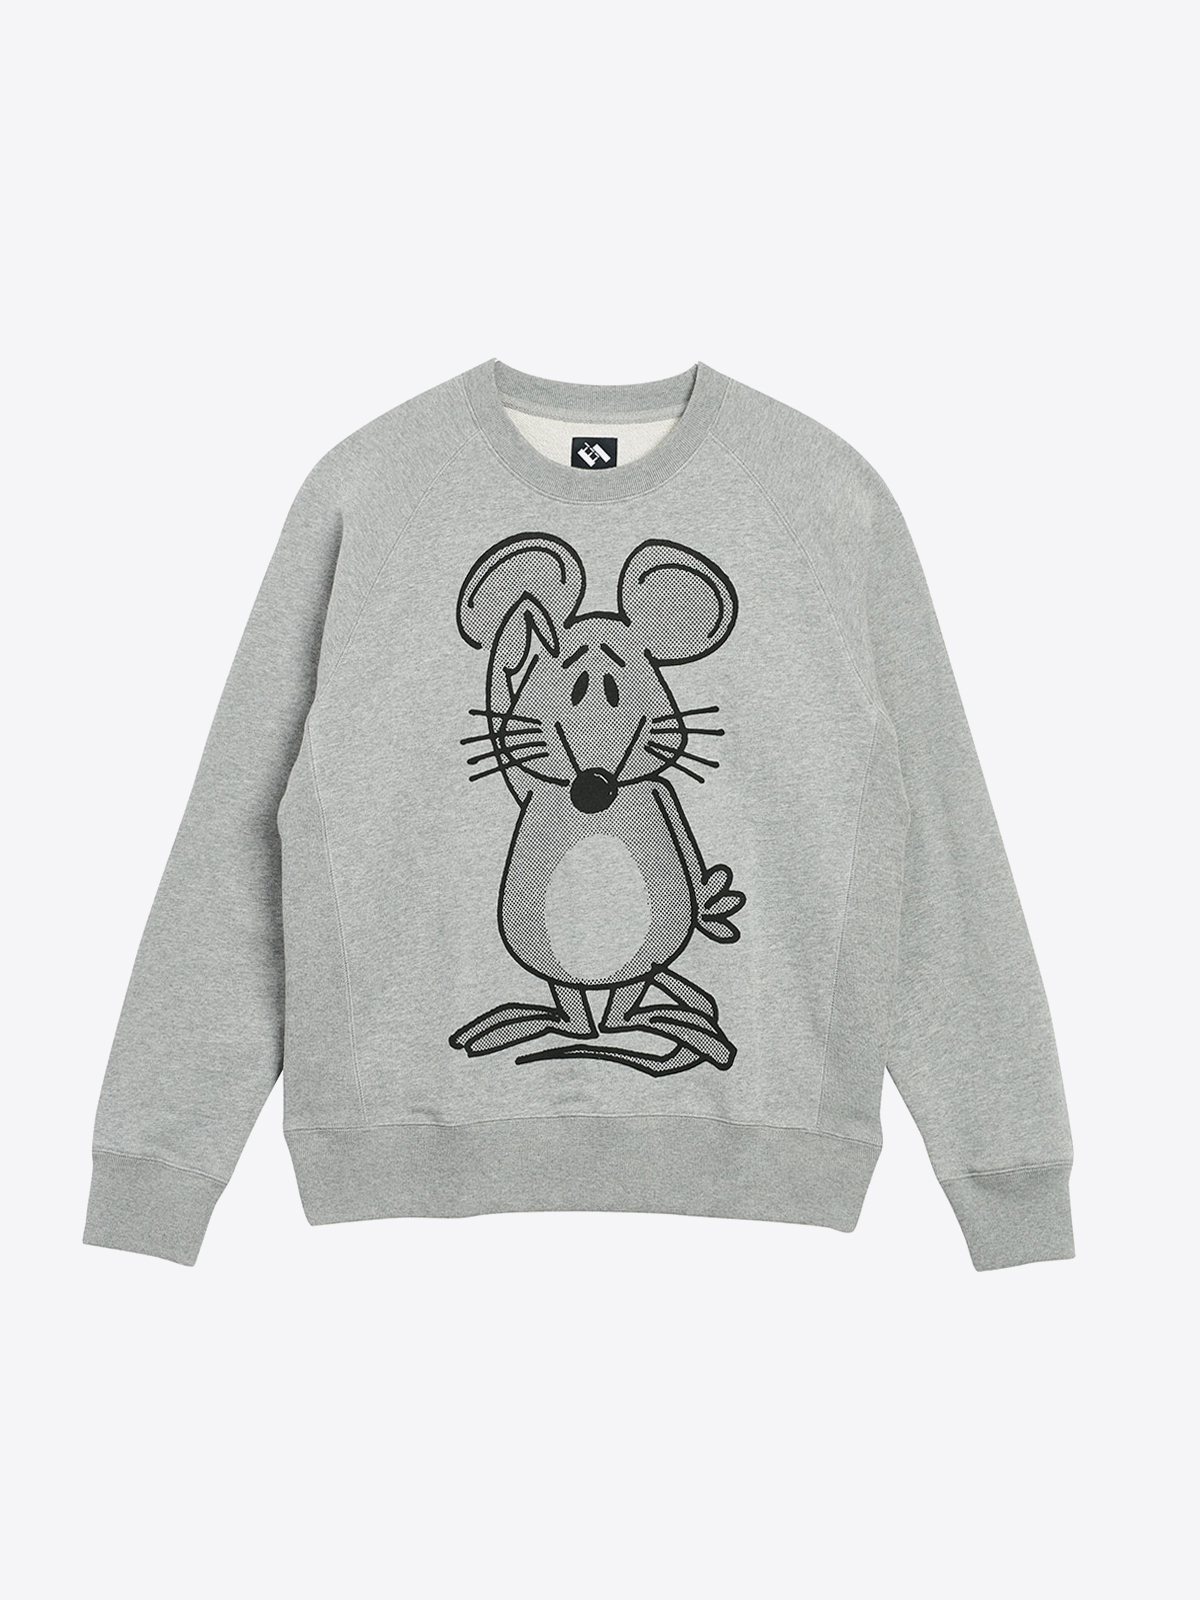 the trilogy tapes ttt MOUSE CREW HEATHER GREY